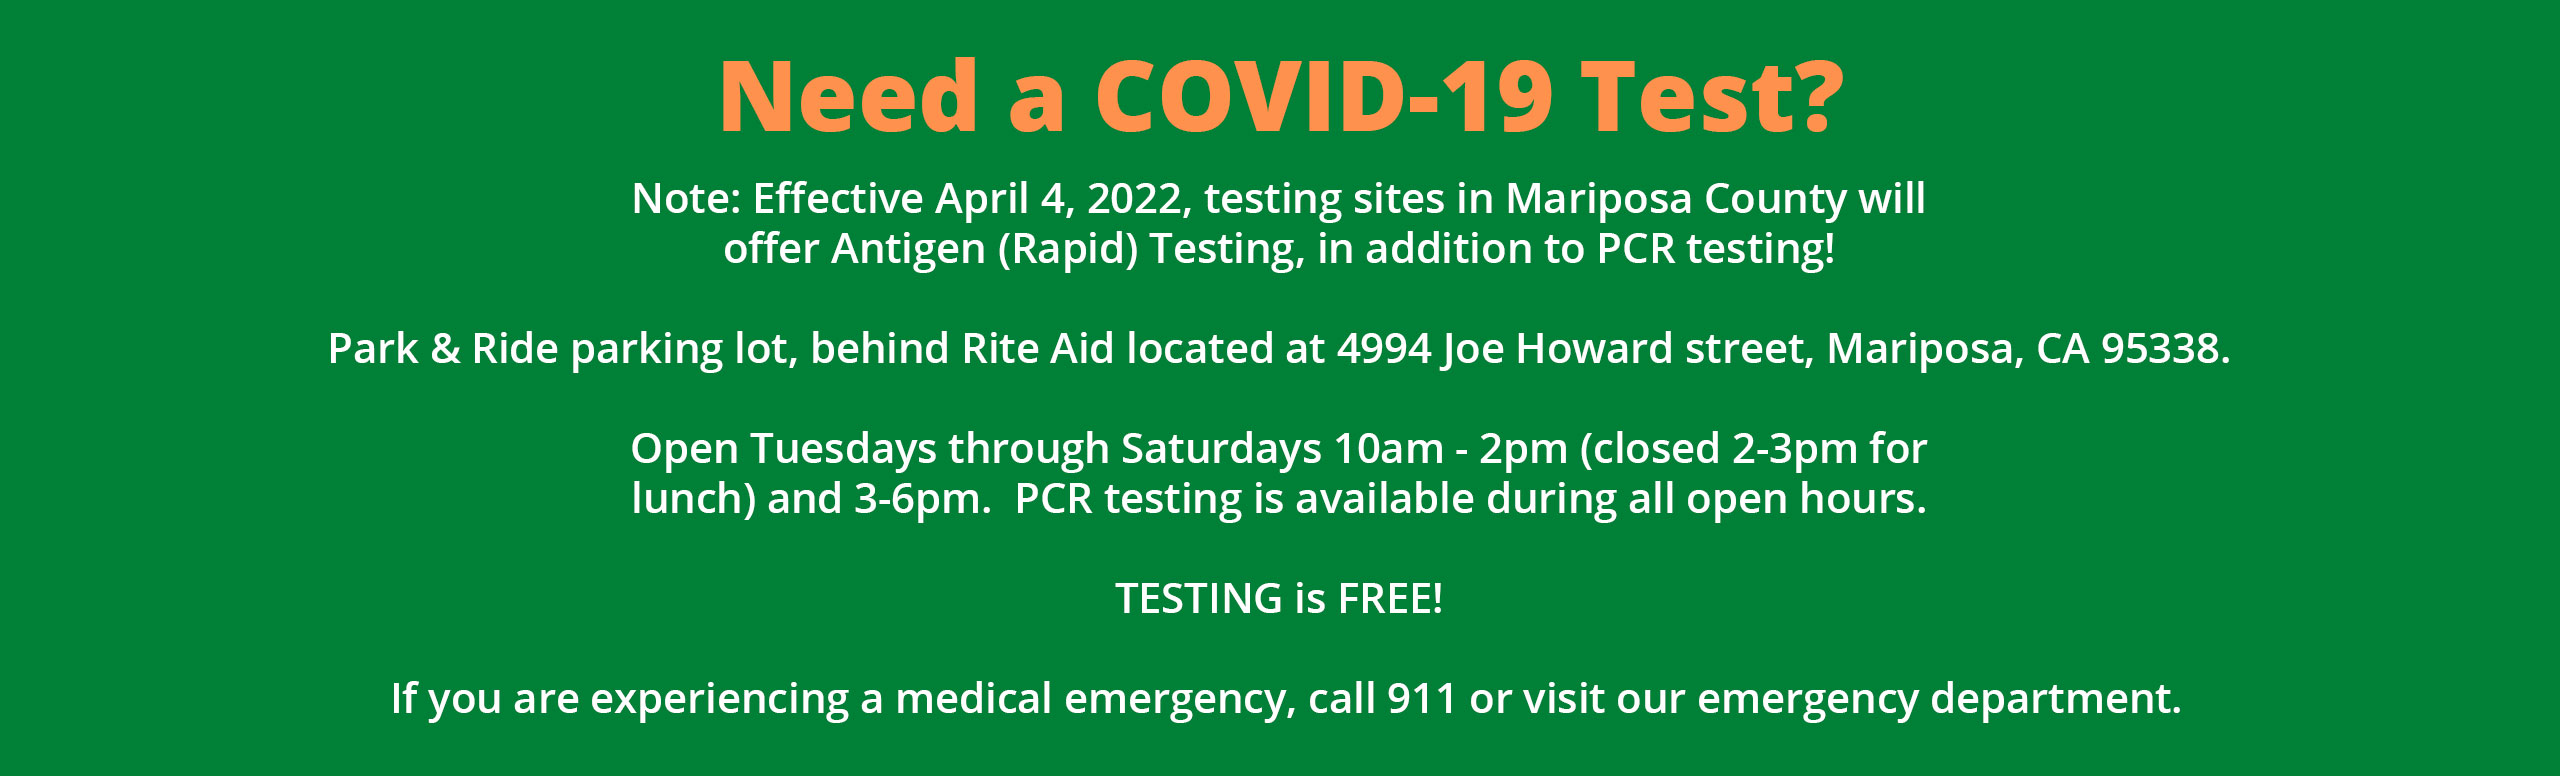 Banner that says:

Need a COVID-19 Test?

Note: Effective April 4, 2022, testing sites in Mariposa County will offer Antigen (Rapid) Testing, in addition to PCR testing!

Park & Ride parking lot, behind Rite Aid located at 4994 Joe Howard Street, Mariposa, CA 95338.

Open Tuesday's through Saturday's 10am- 2pm (closed 2-3 pm for lunch) and 3-6pm. PCR testing is available during all open hours.

TESTING IS FREE!

If you are experiencing a medical emergency, call 911 or visit our emergency department.